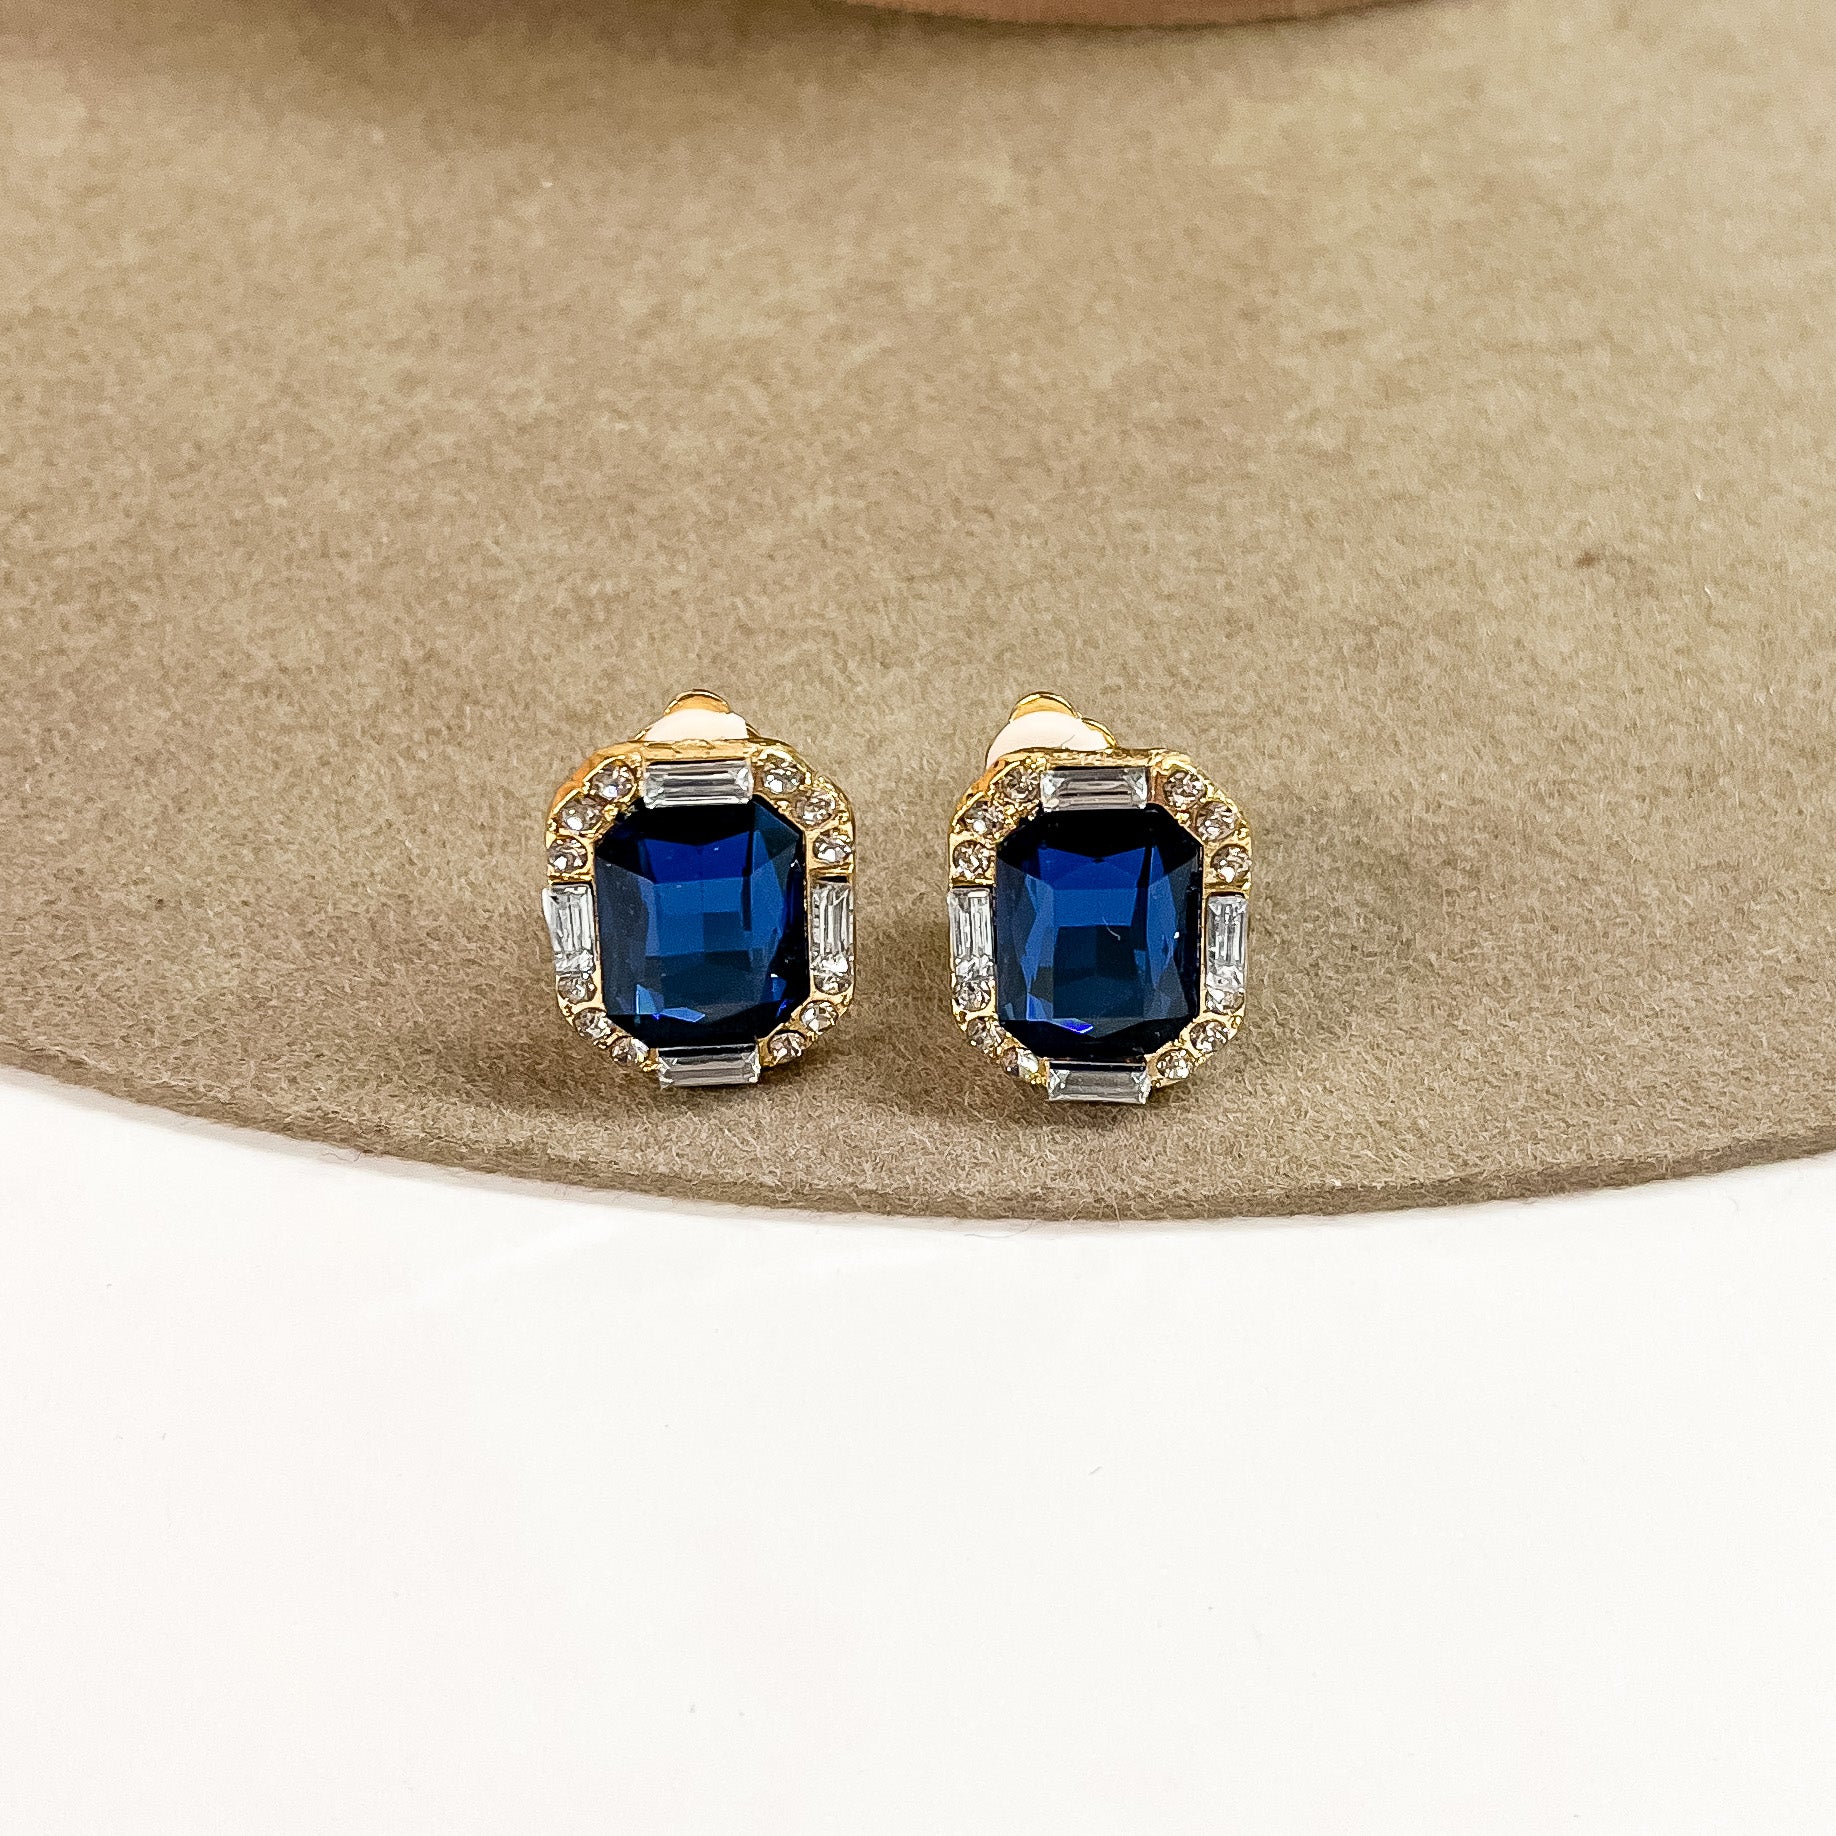 Buy 3 for $10 | Faux Crystal Stud Clip on Earrings with Small Crystal Detailing - Giddy Up Glamour Boutique